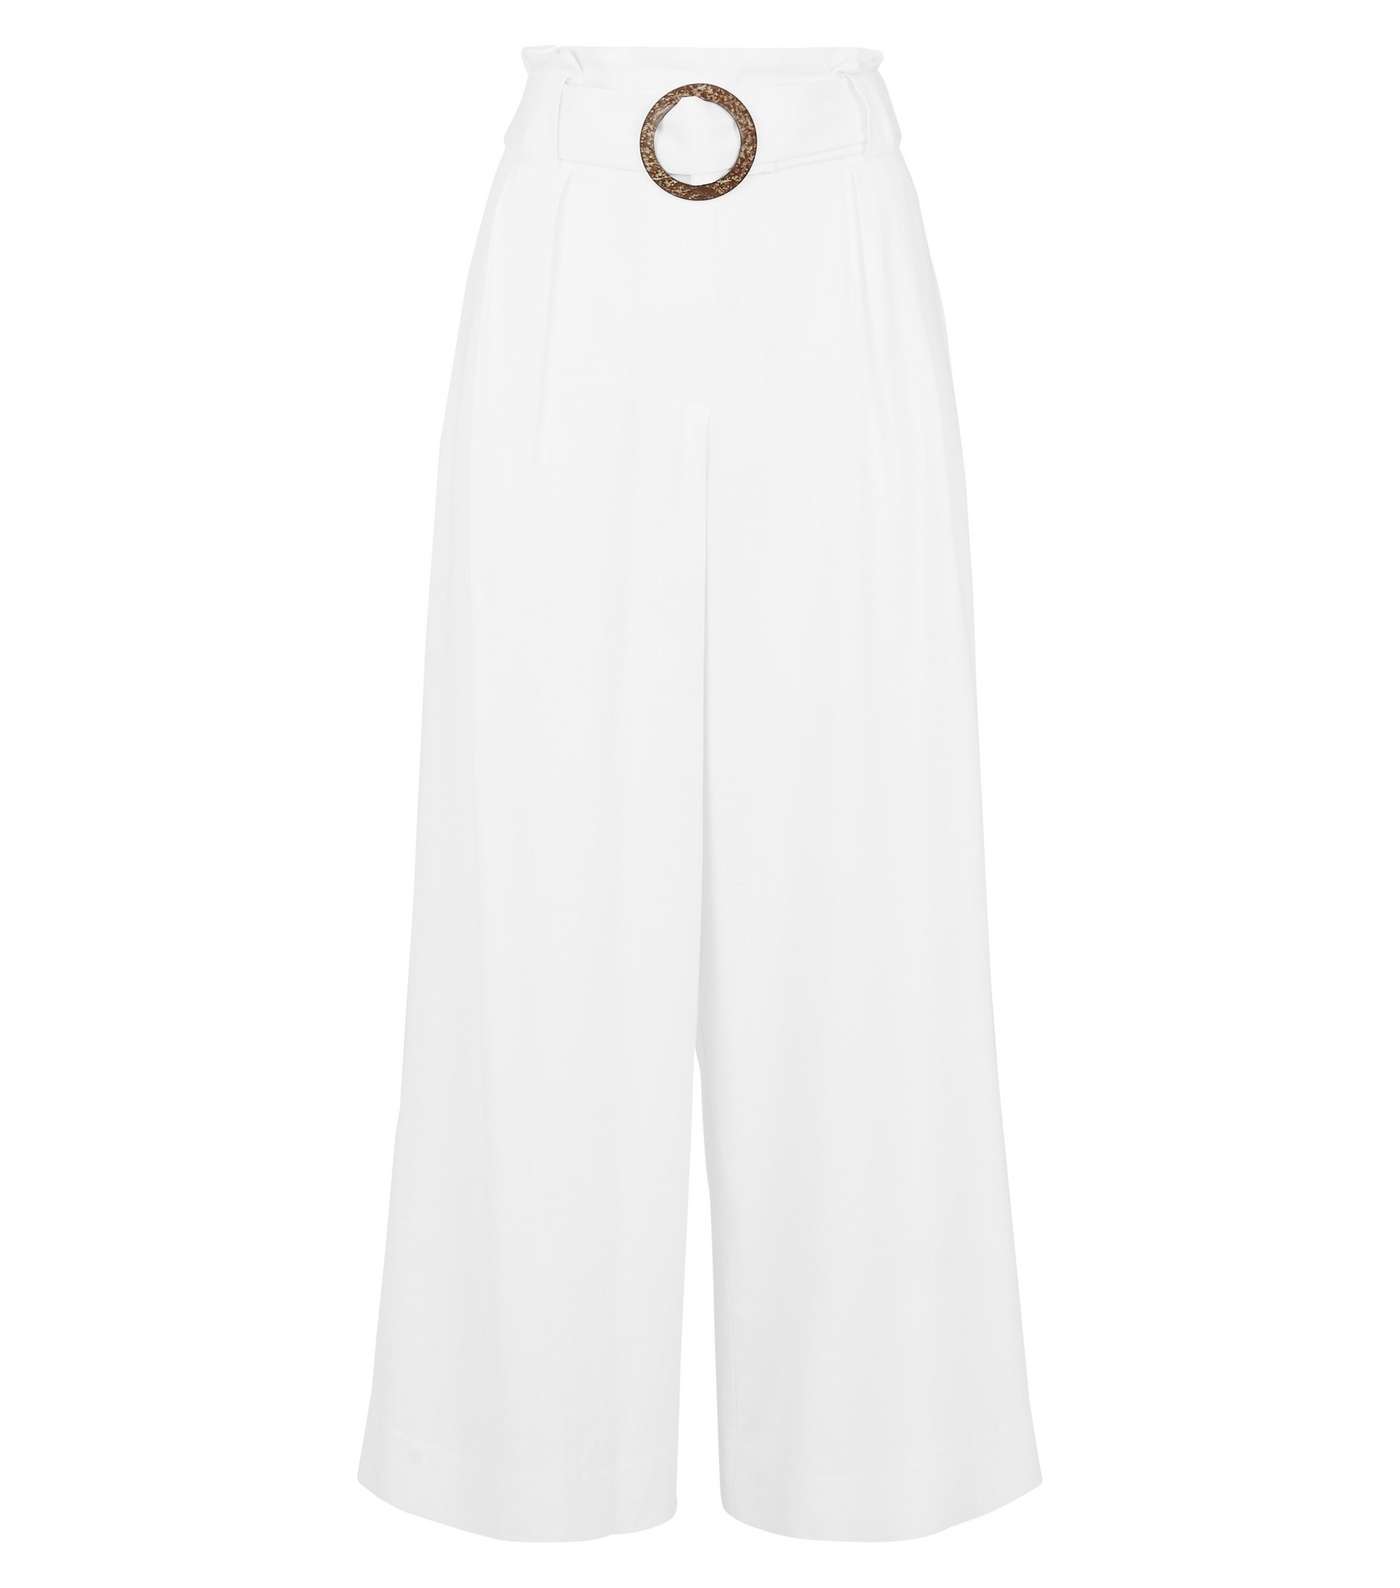 White Linen Look Crop Trousers Image 4